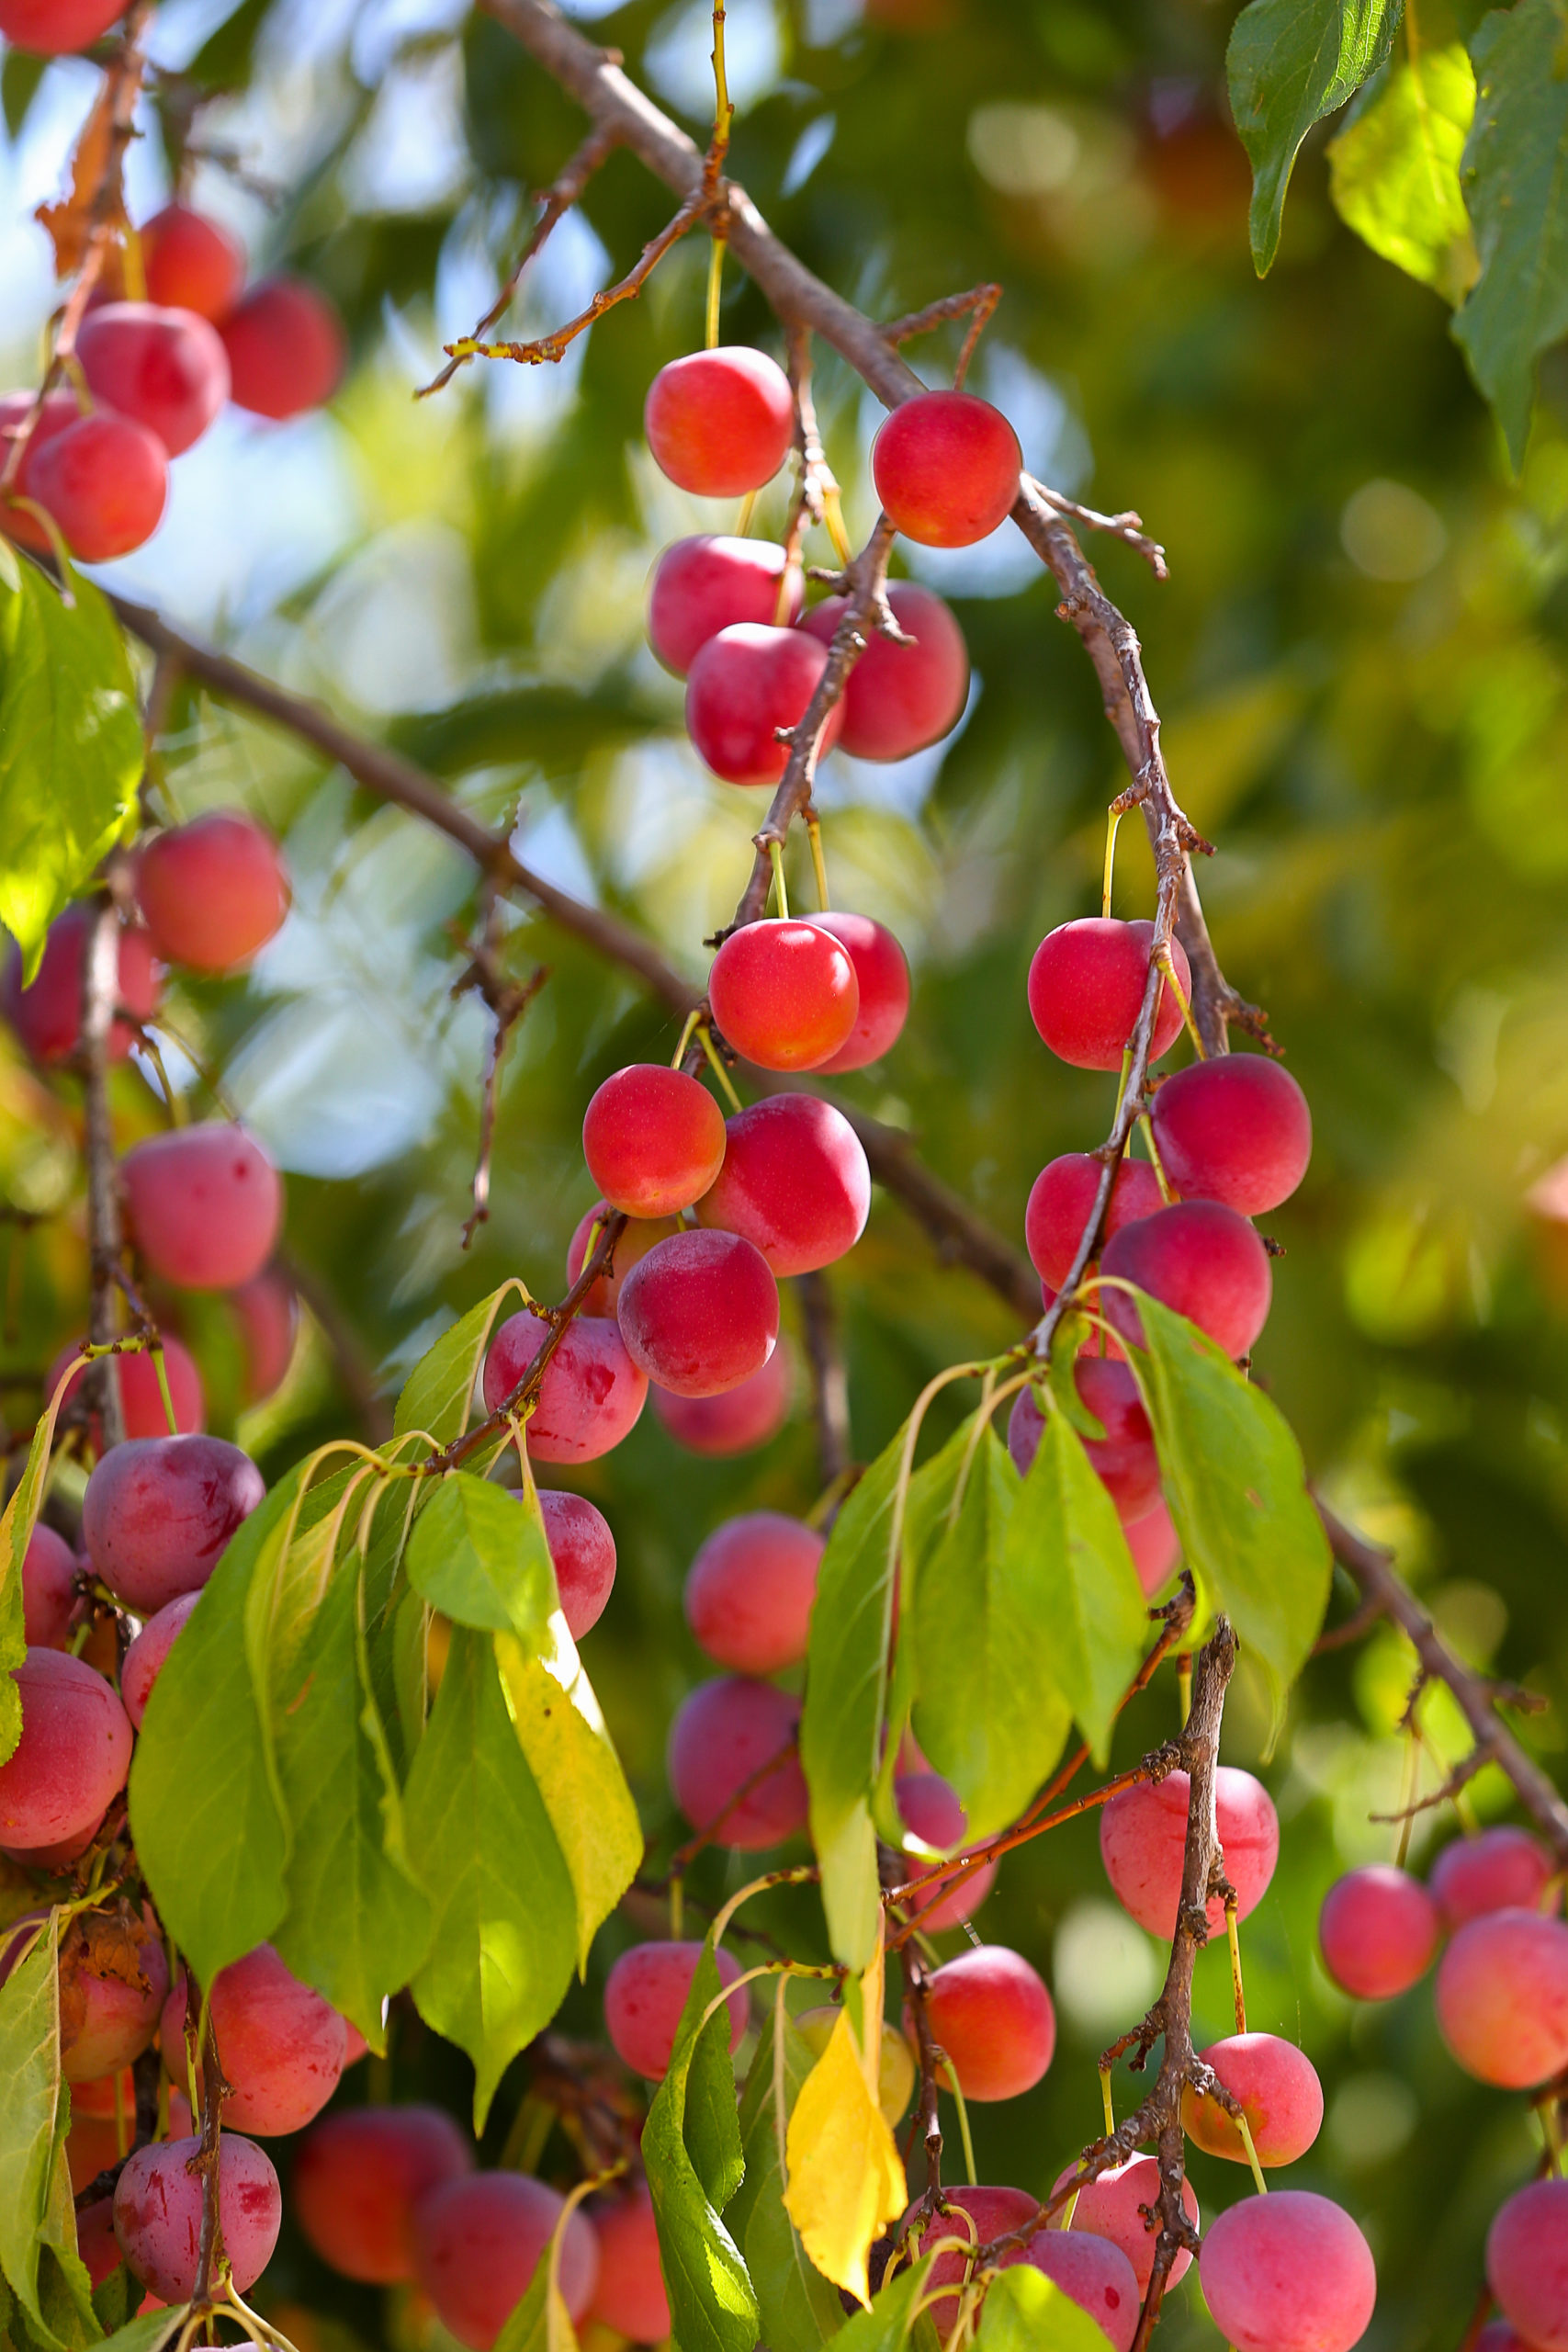 Wild plums ripen in the Dog Run Orchard at Fourteen Magpies Handmade Jams & Preserves in Santa Rosa on Wednesday, July 21, 2021. (Christopher Chung/ The Press Democrat)